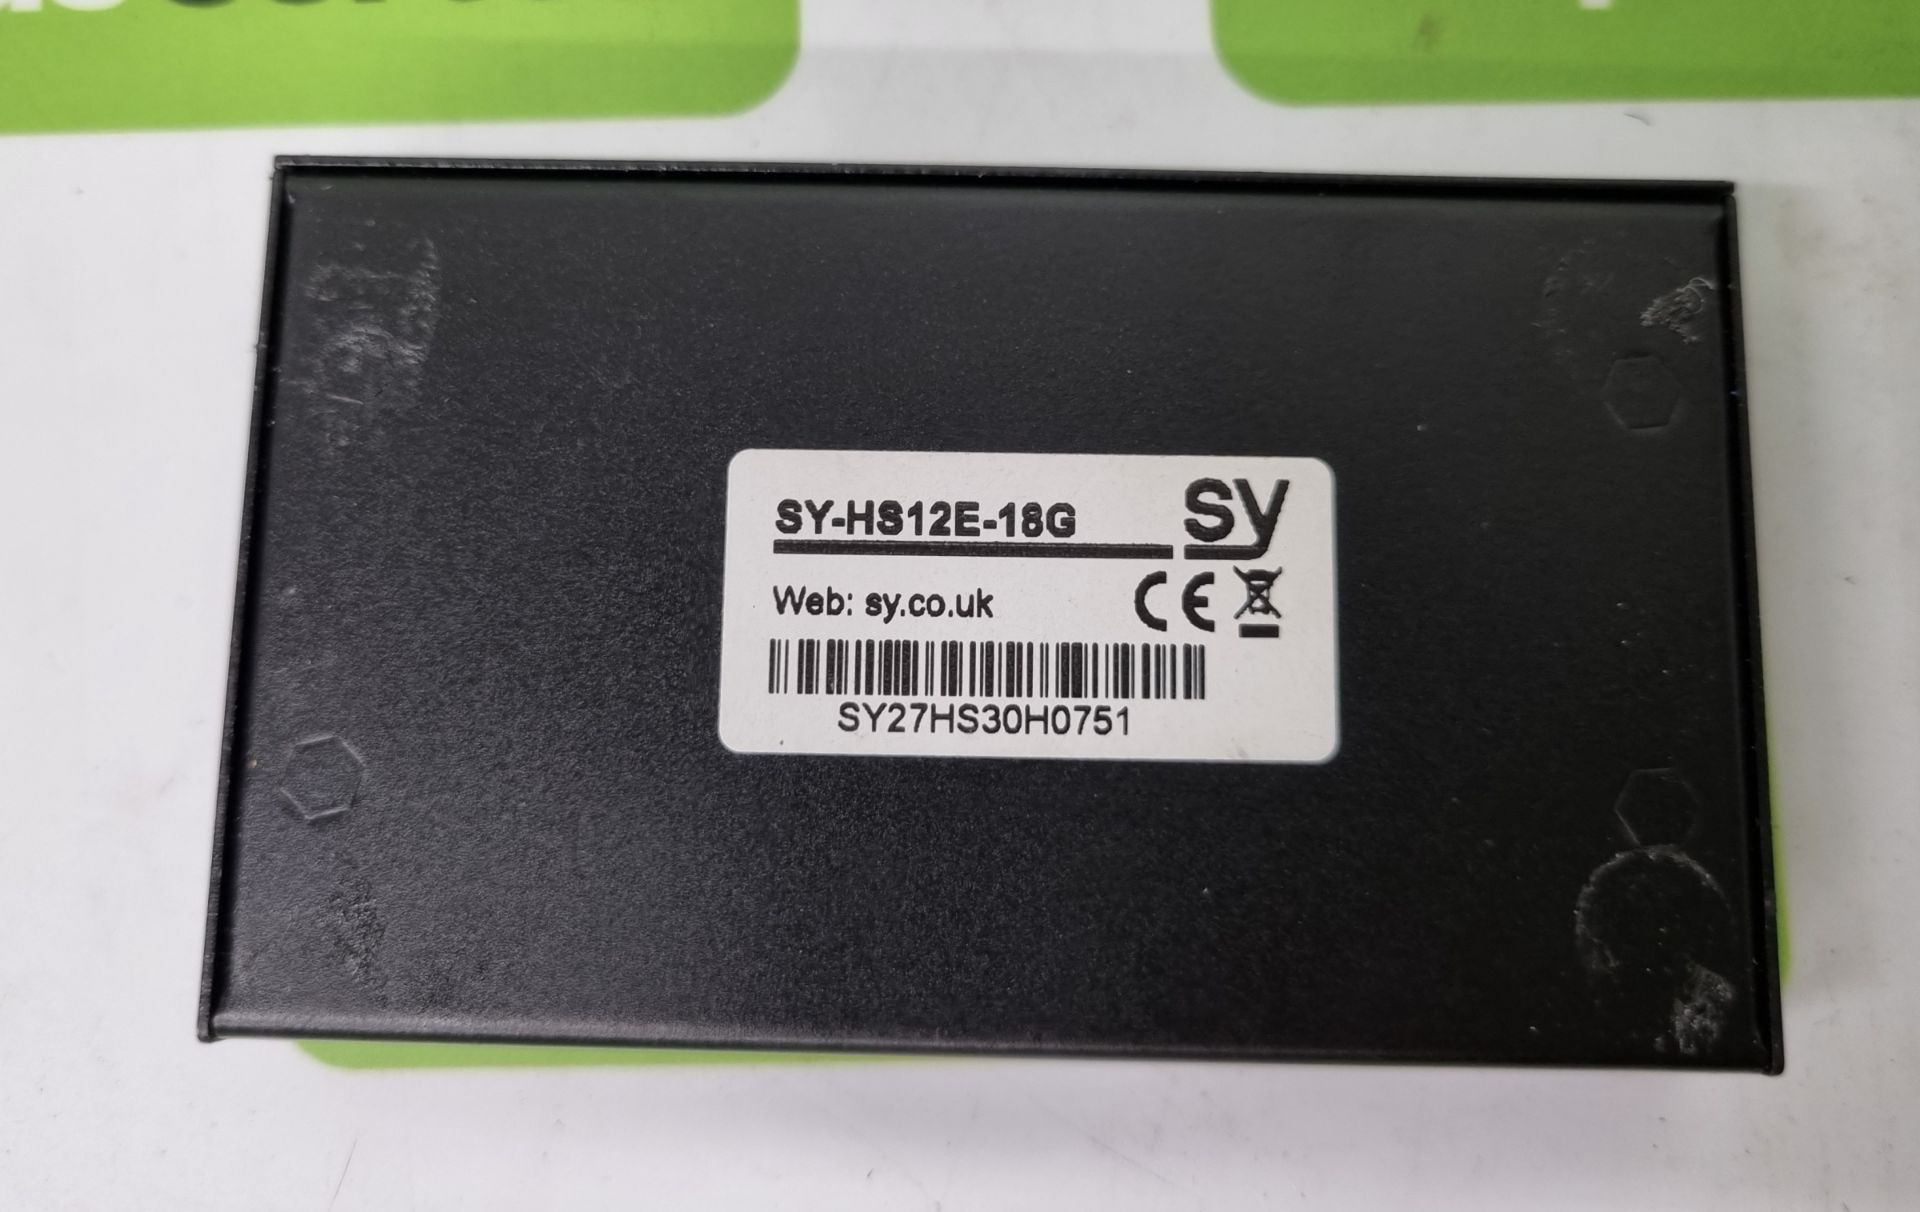 SY-HS12E-18G 1x2 HDMI 2.0 (18Gbps) splitter - Image 6 of 7